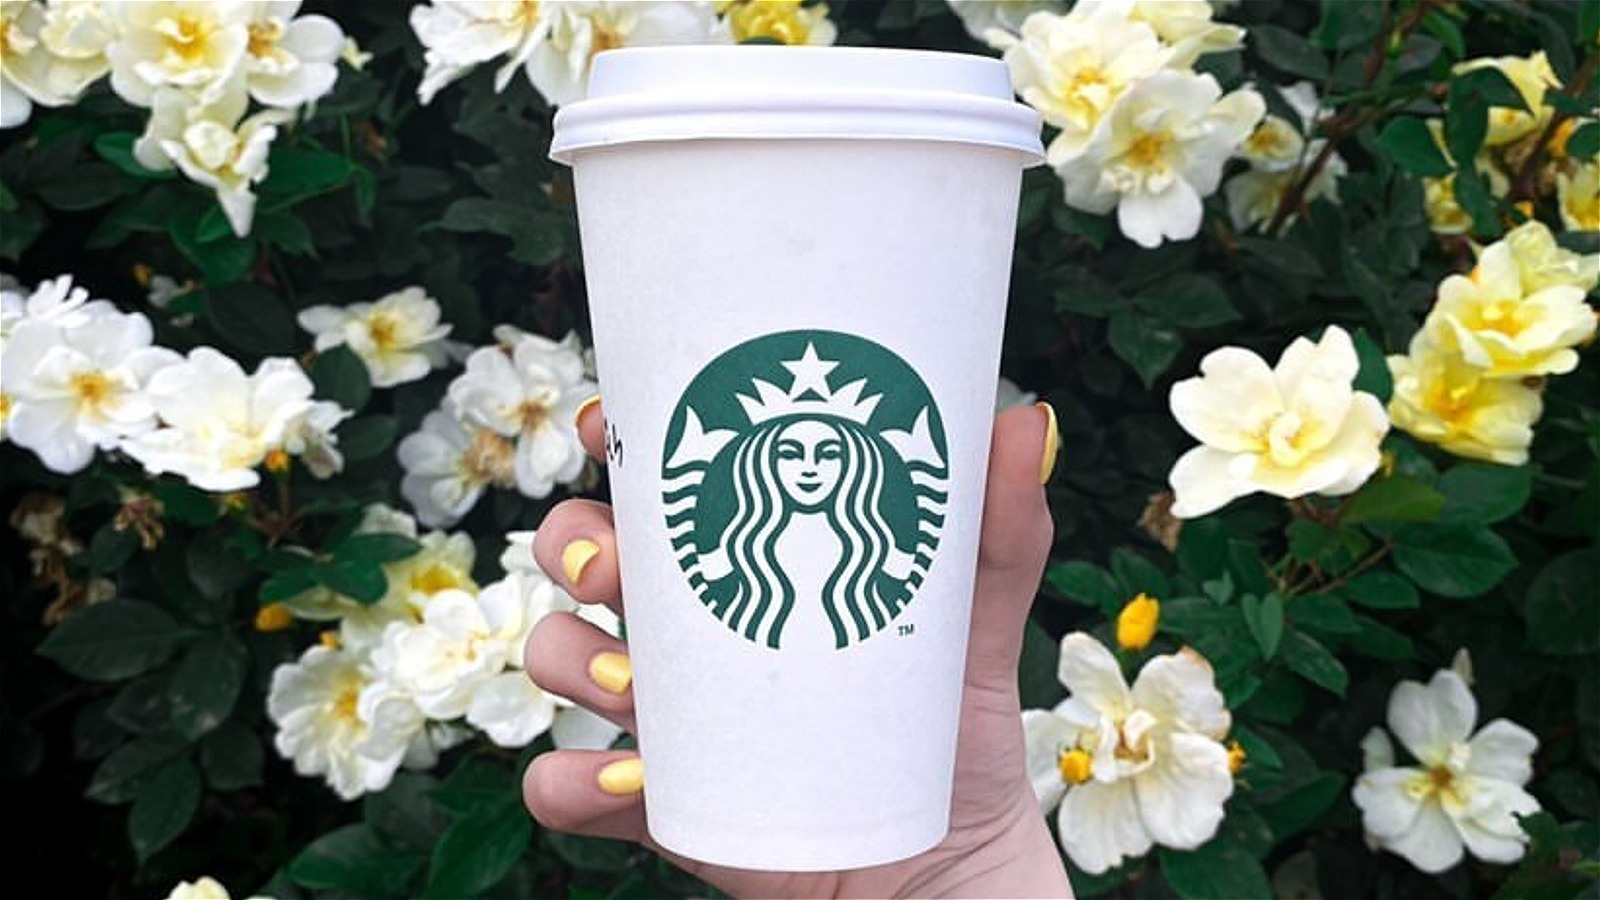 https://www.mashed.com/img/gallery/starbucks-fans-are-in-shambles-over-alleged-swap-to-paper-iced-coffee-cups/l-intro-1684954519.jpg